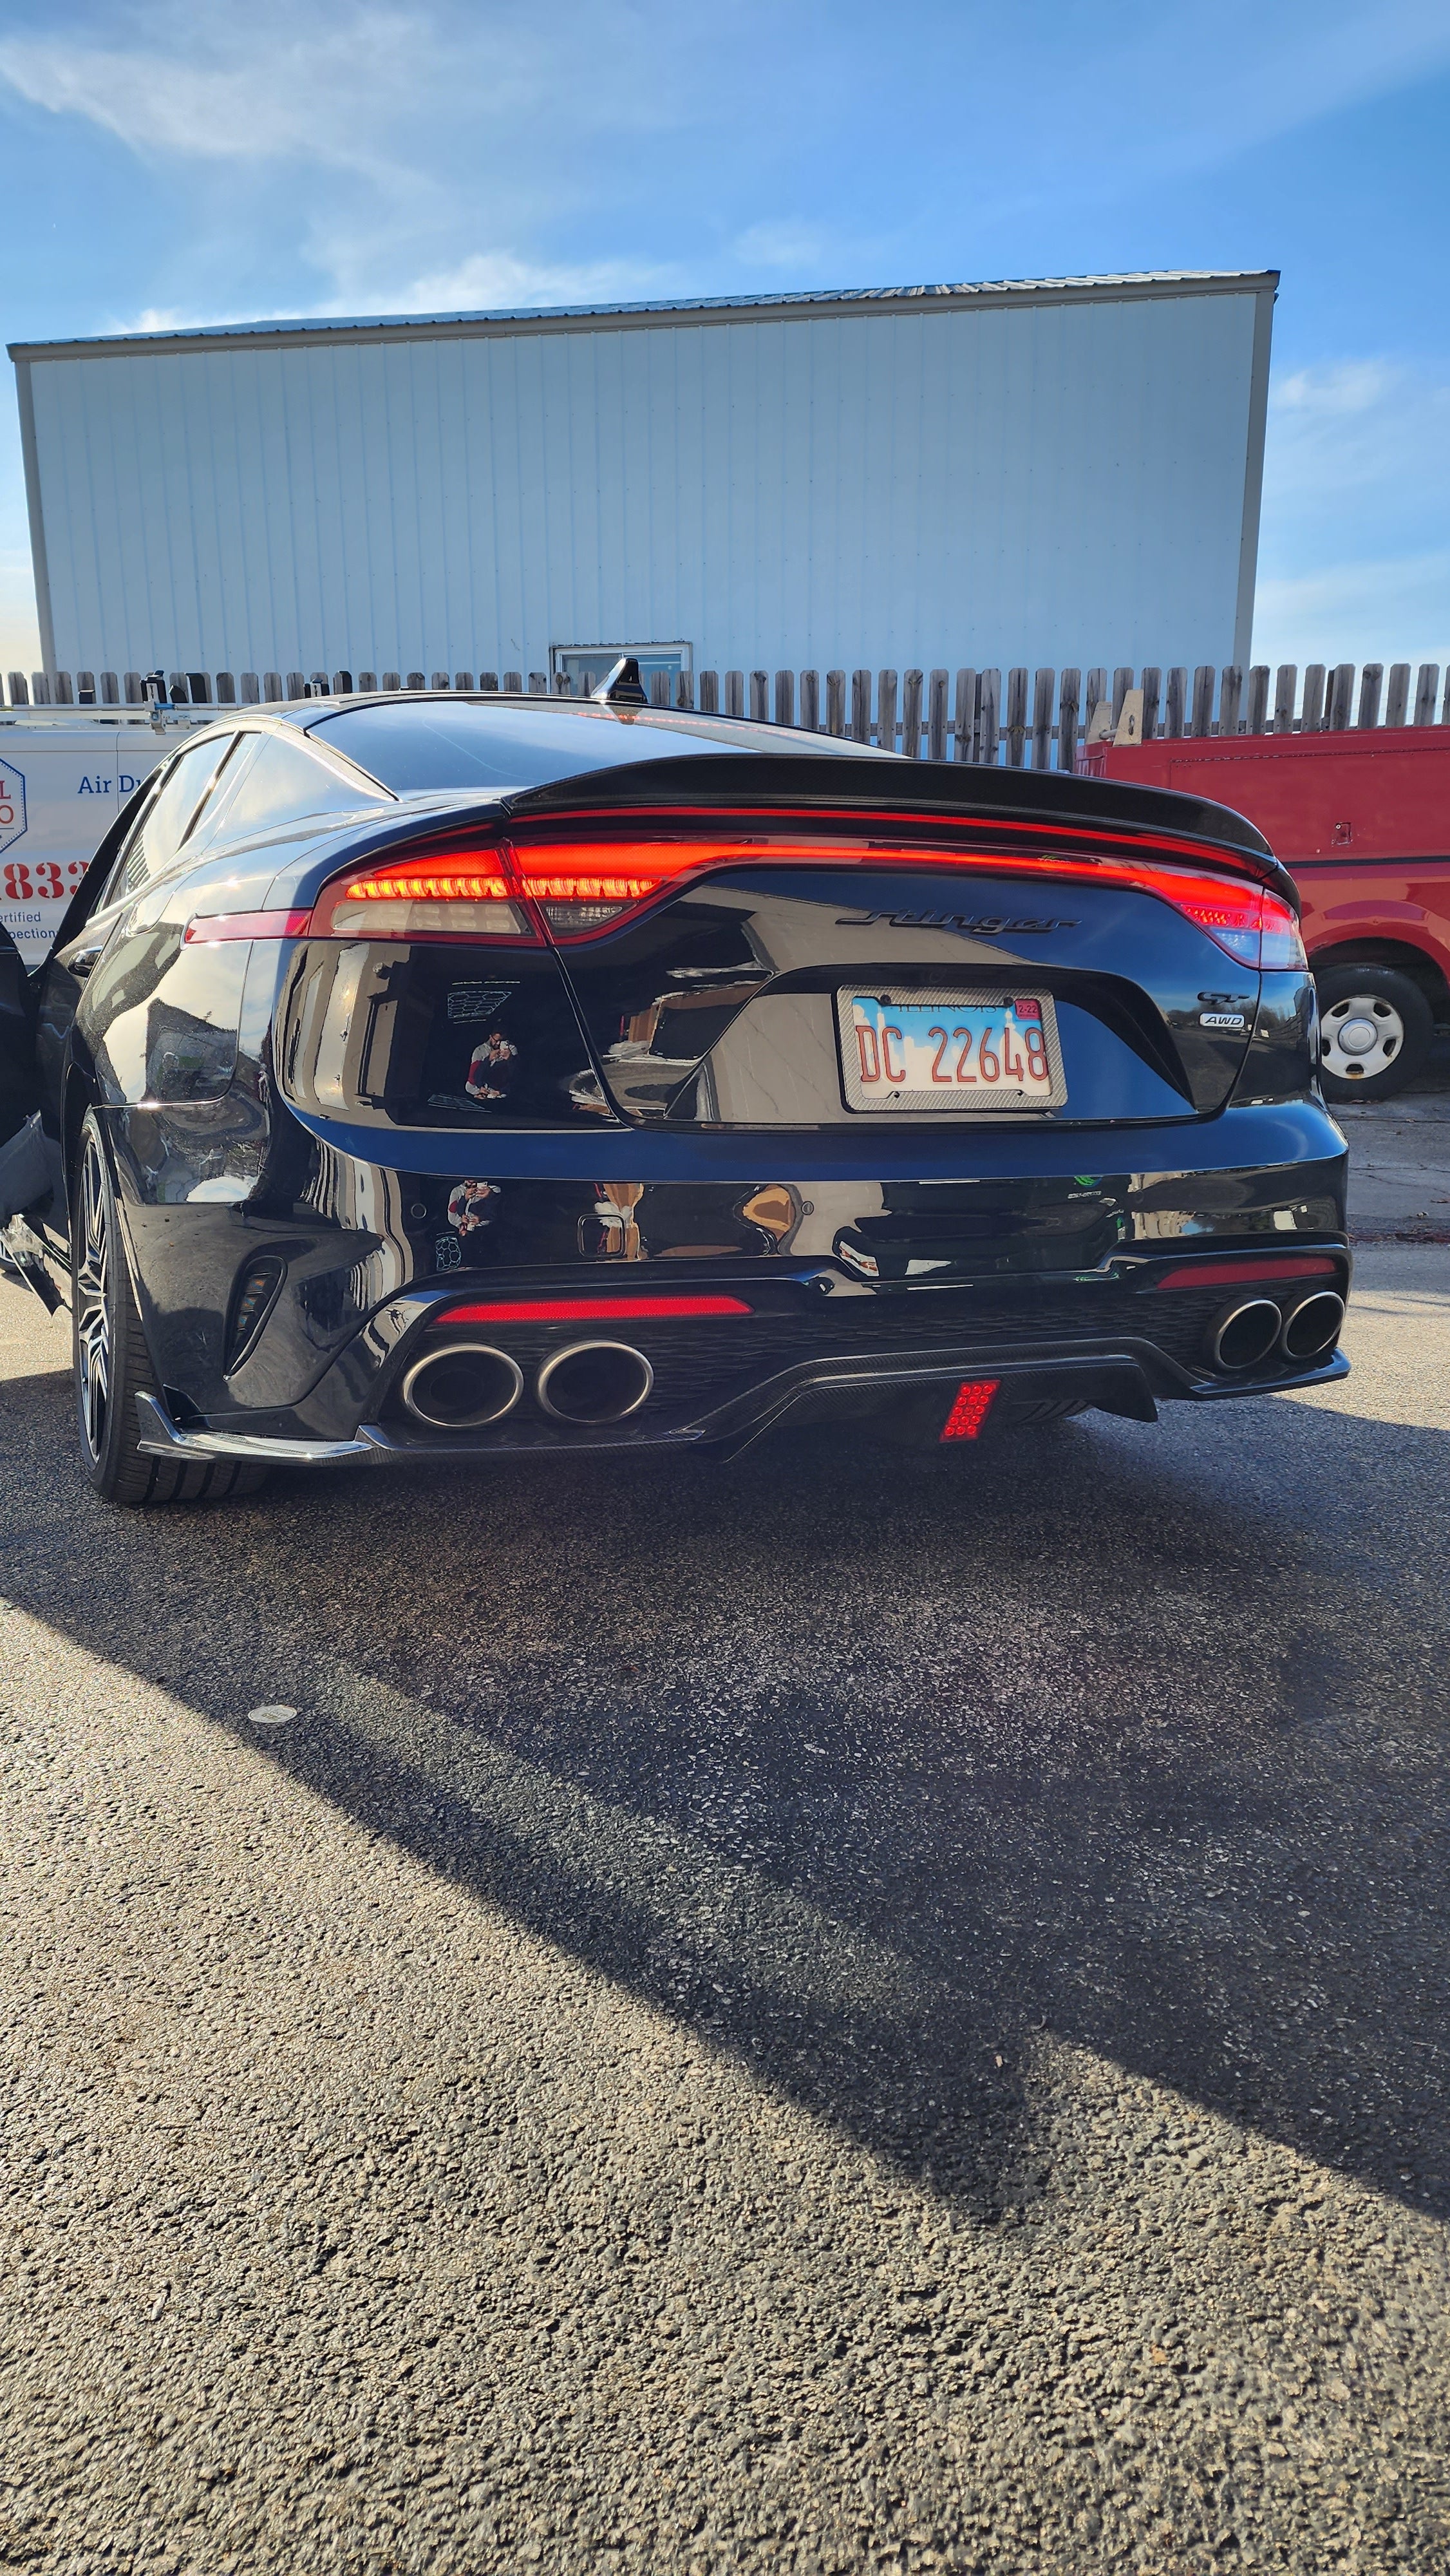 Detailed view focusing on the 3rd Brake Light of the Carbon Fiber Diffuser on the KIA STINGER, demonstrating its functionality and design.